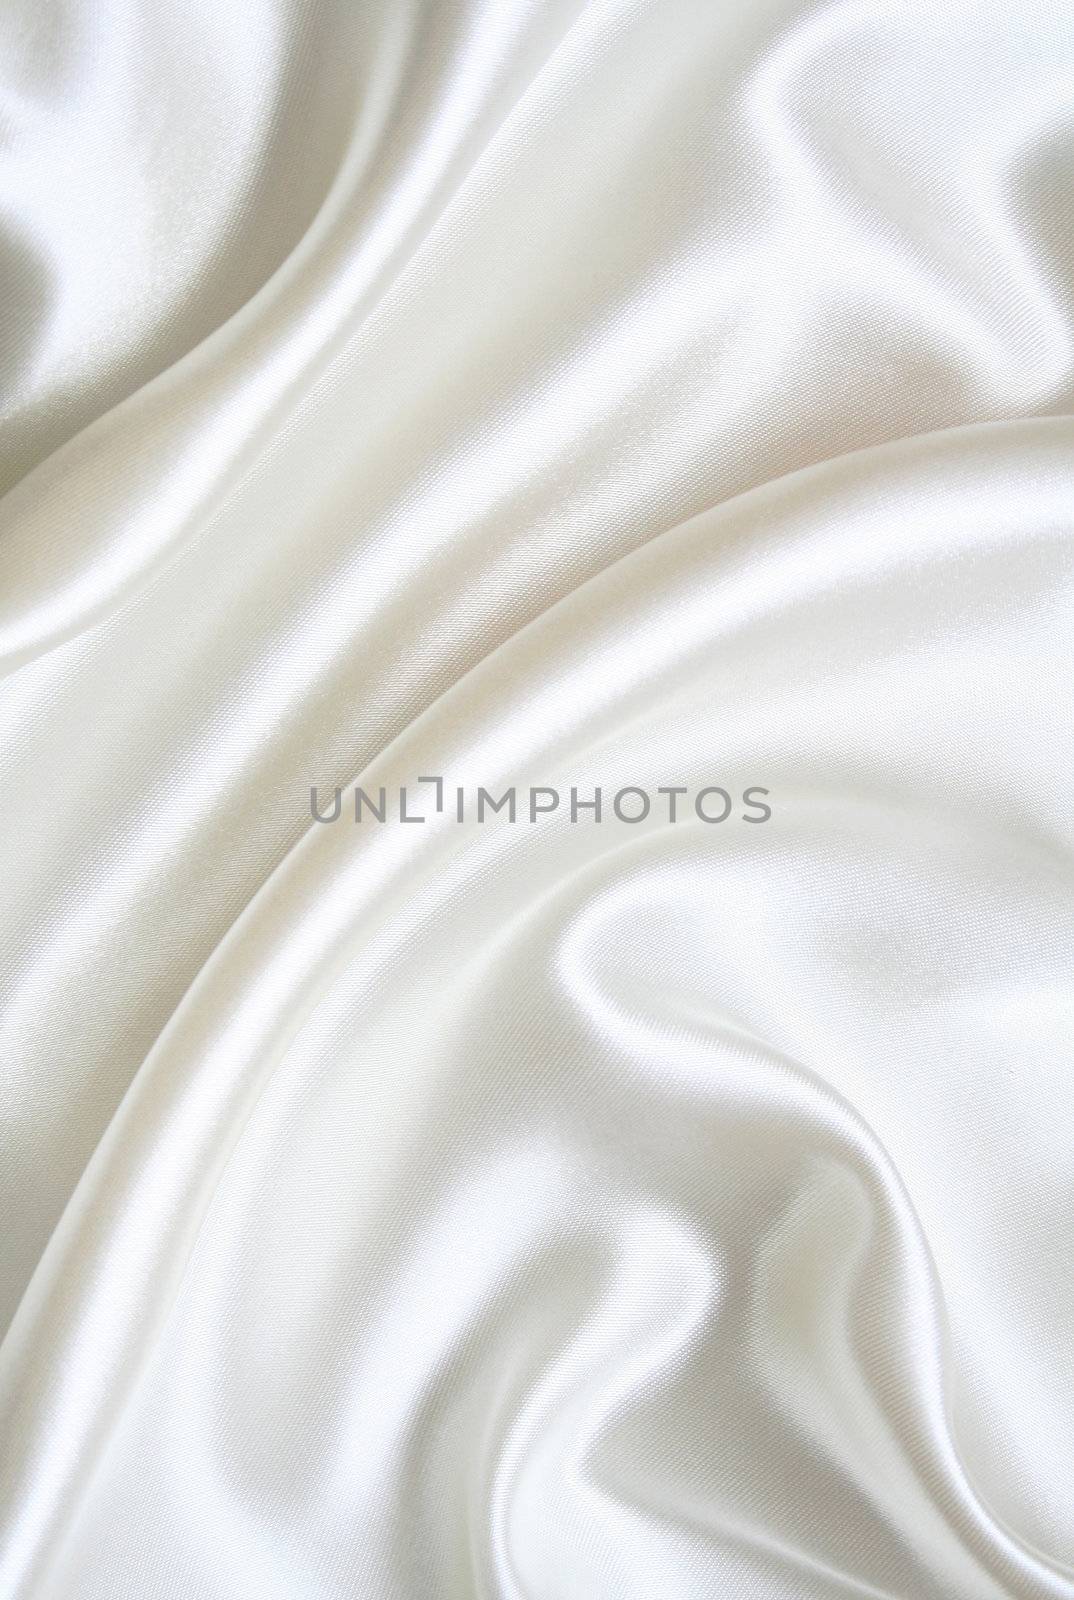 Smooth elegant white silk can use as background